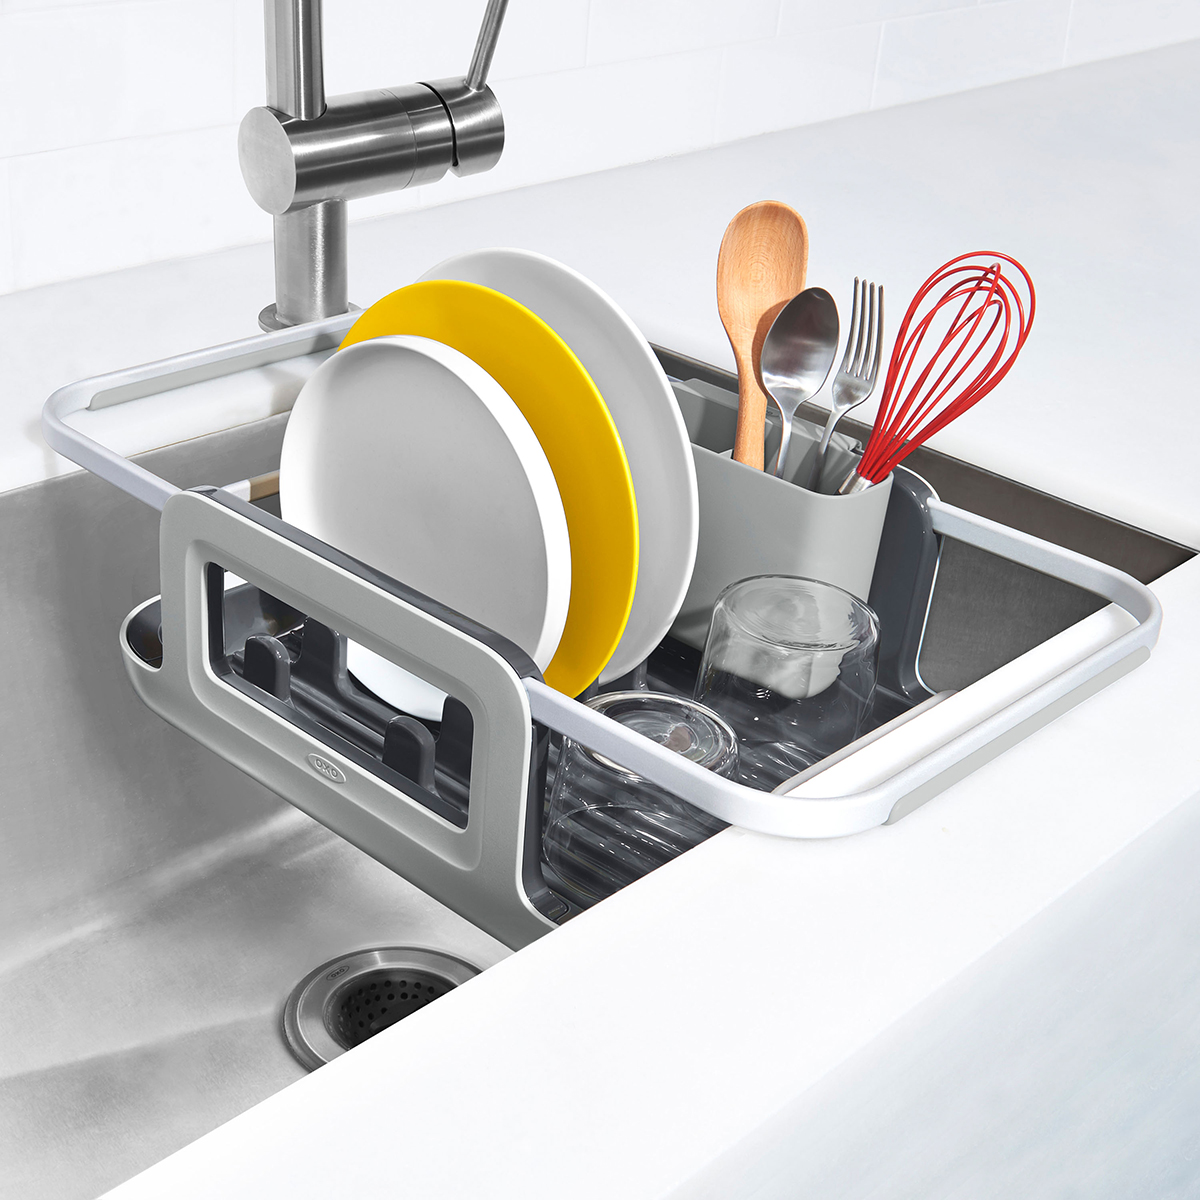 https://www.containerstore.com/catalogimages/476666/10092270-oxo-over-the-sink-dish-rack.jpg